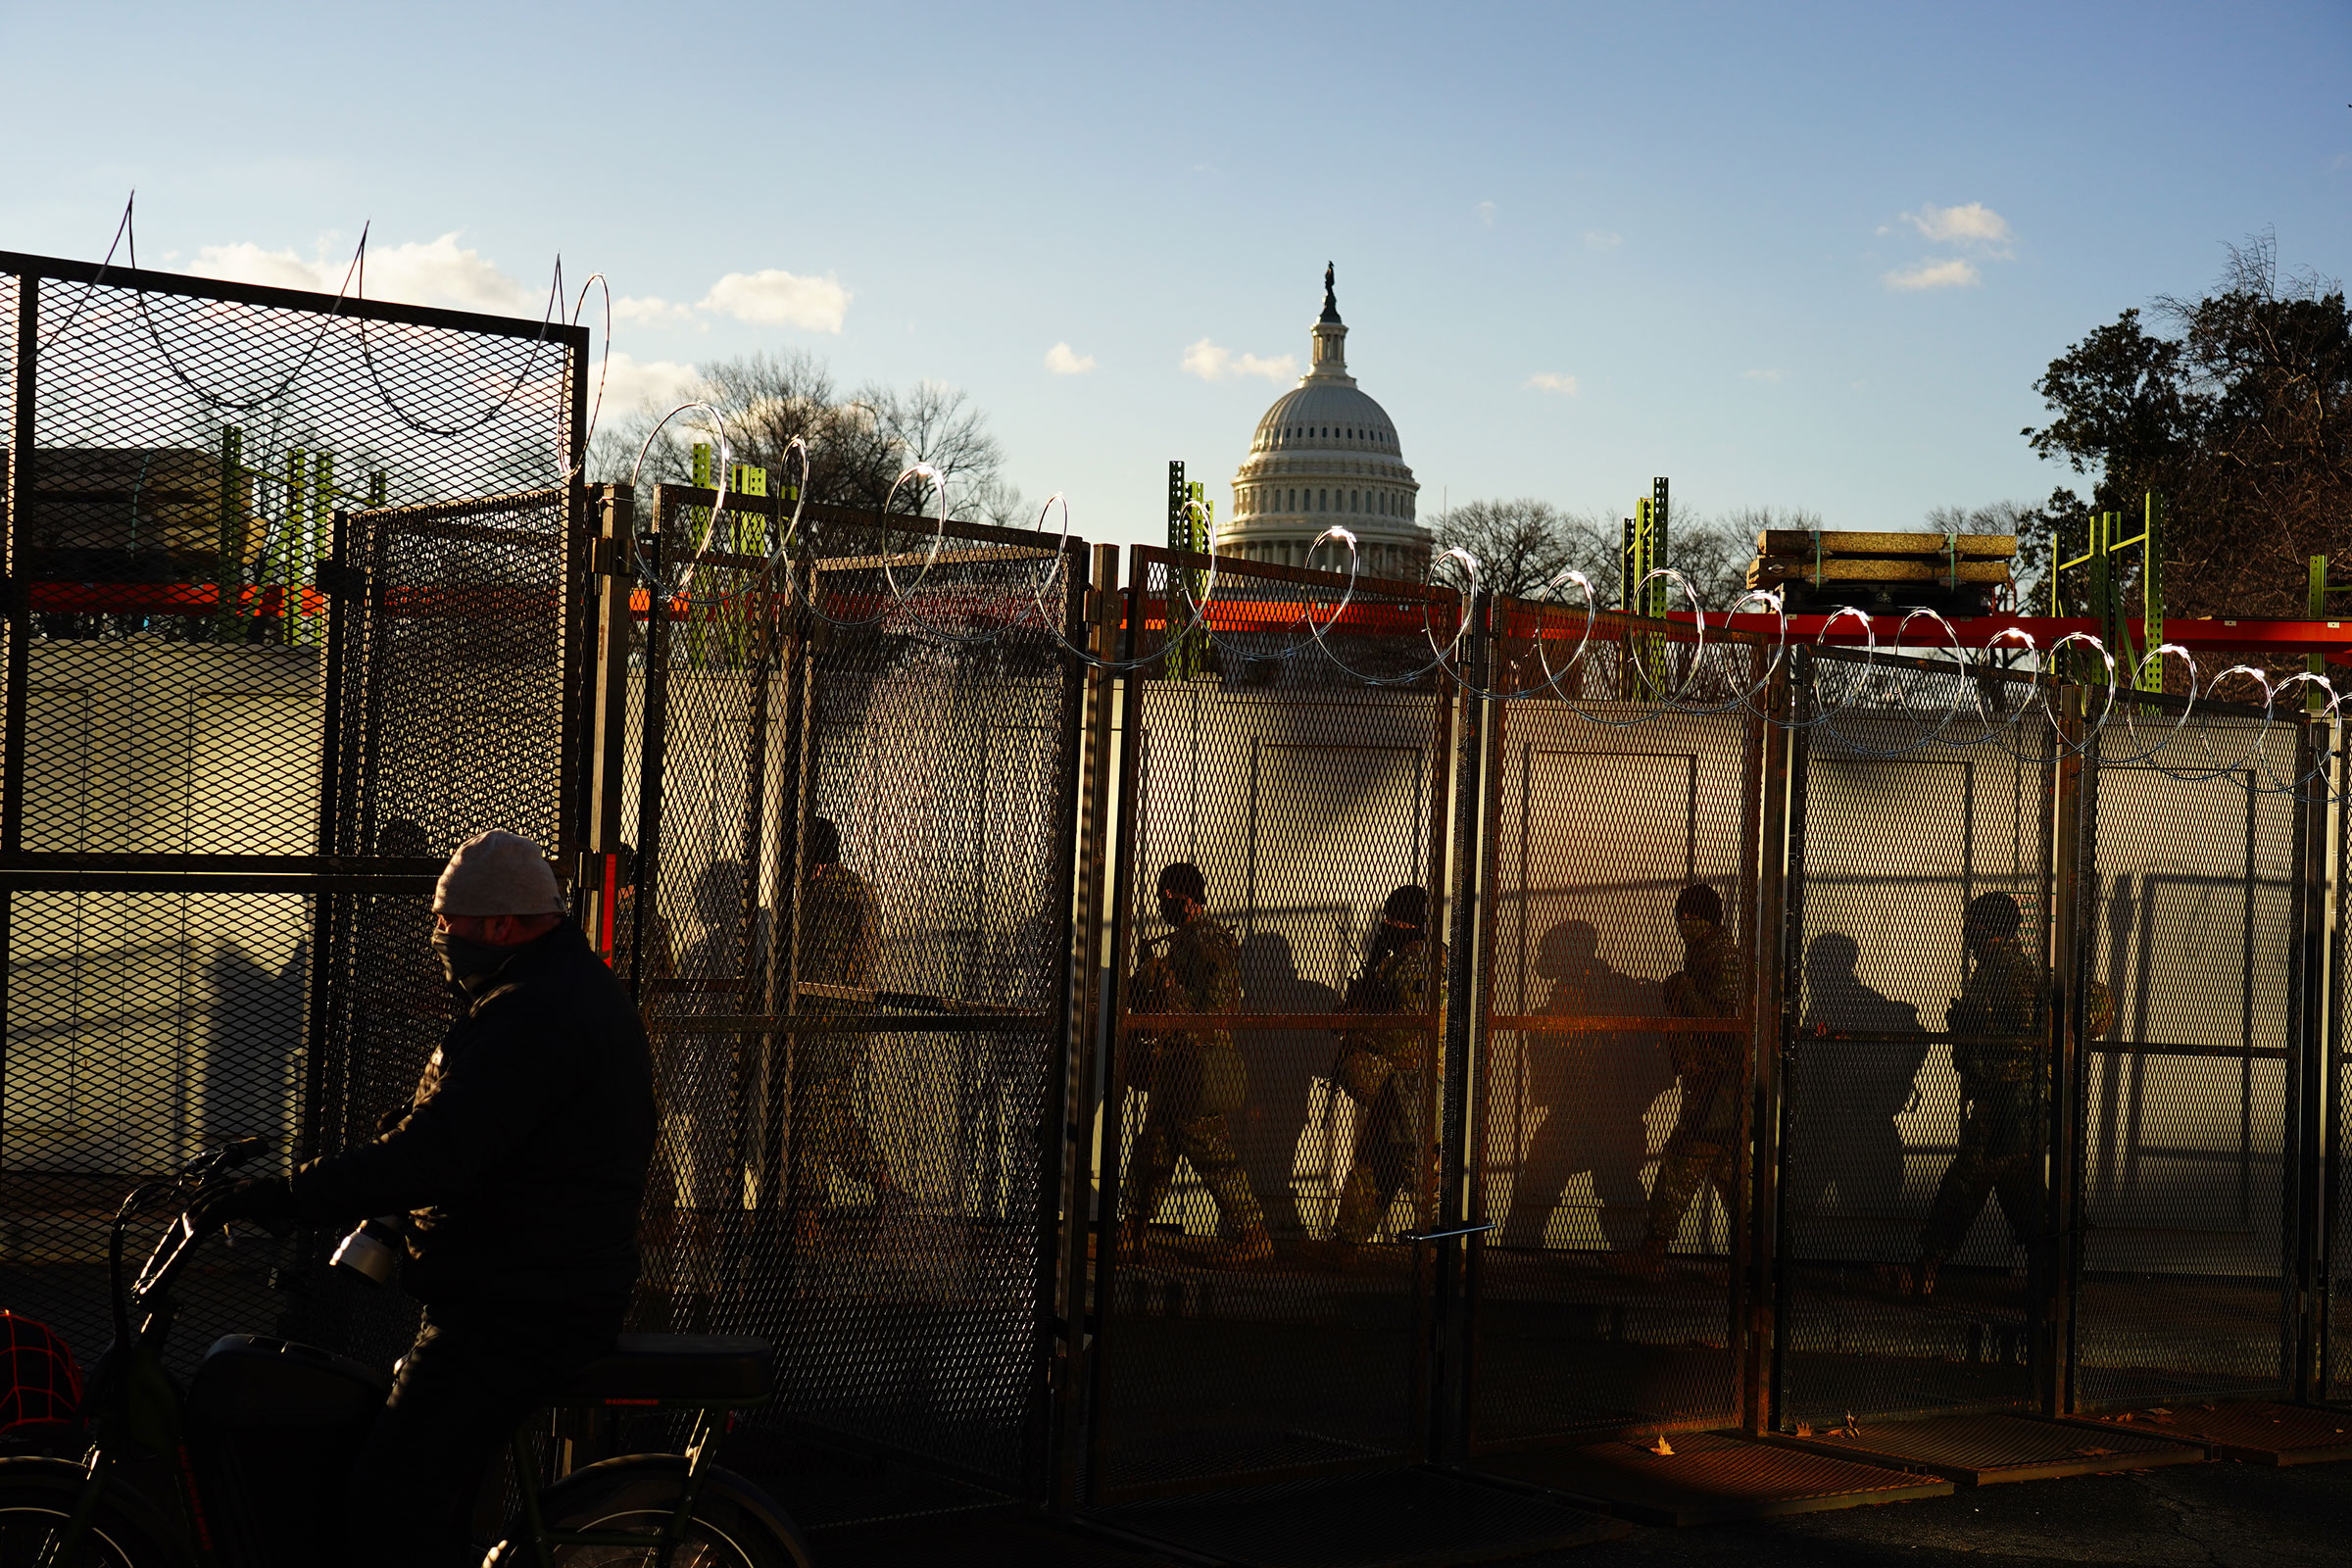 Security and fencing in front of the U.S. Capitol building prior to the start inauguration. (Marcus Yam—Los Angeles Times/Polaris)